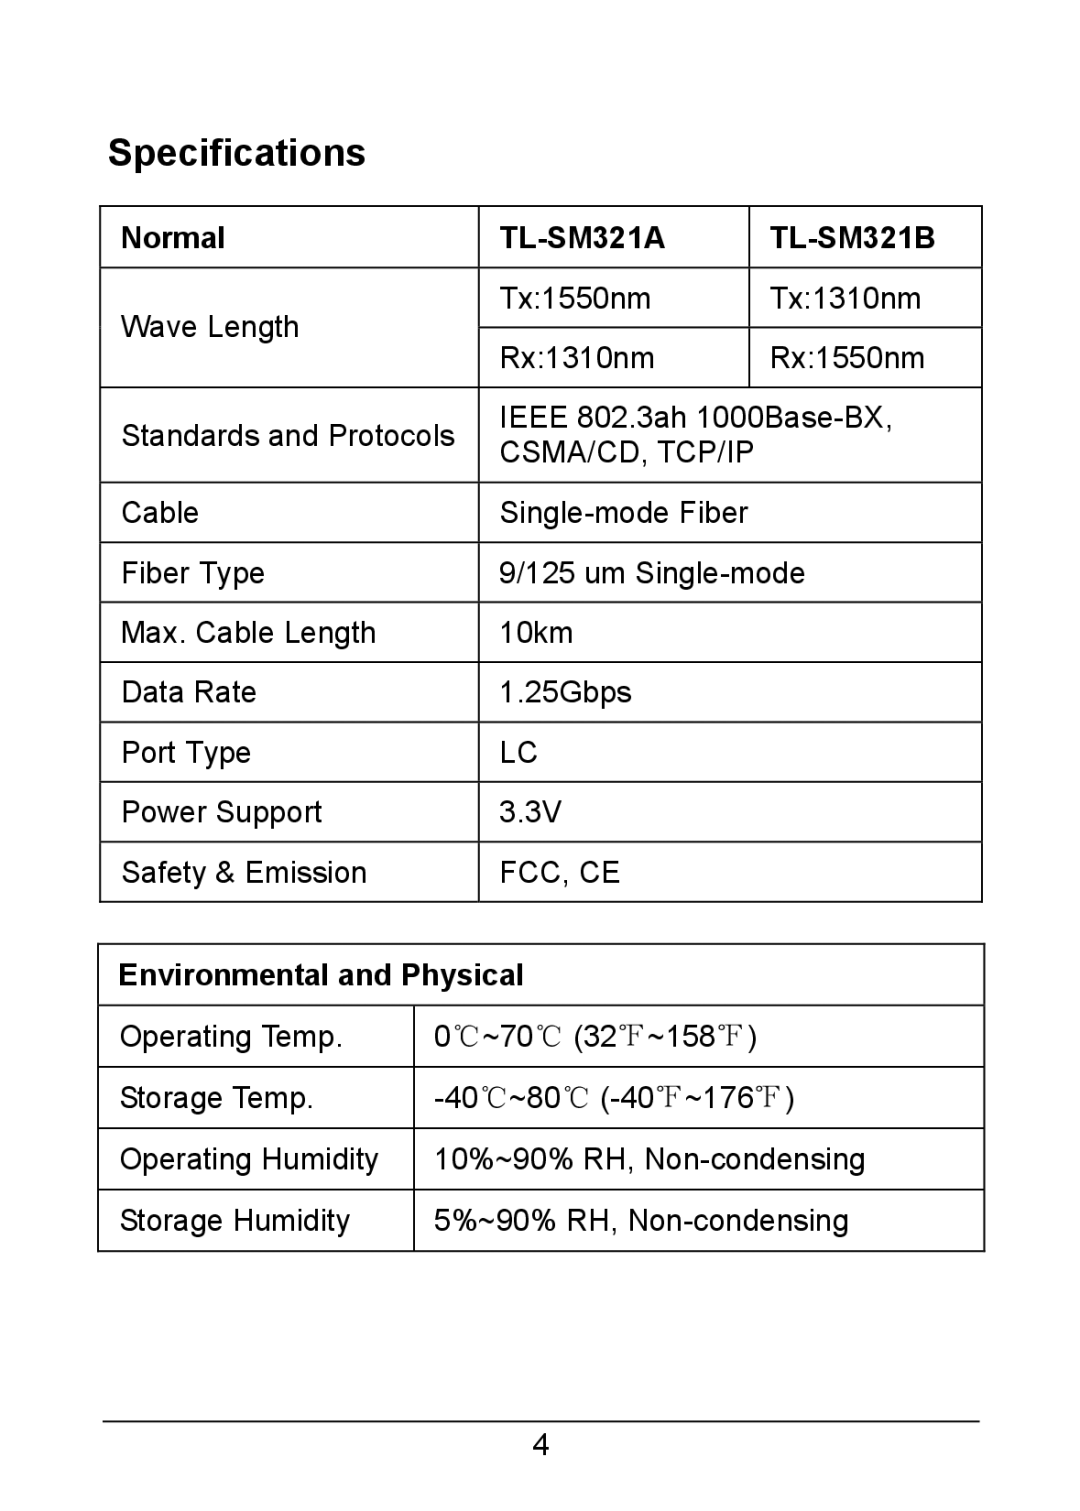 TP-Link TL-SM321B manual Specifications, Normal, TL-SM321A, Environmental and Physical 